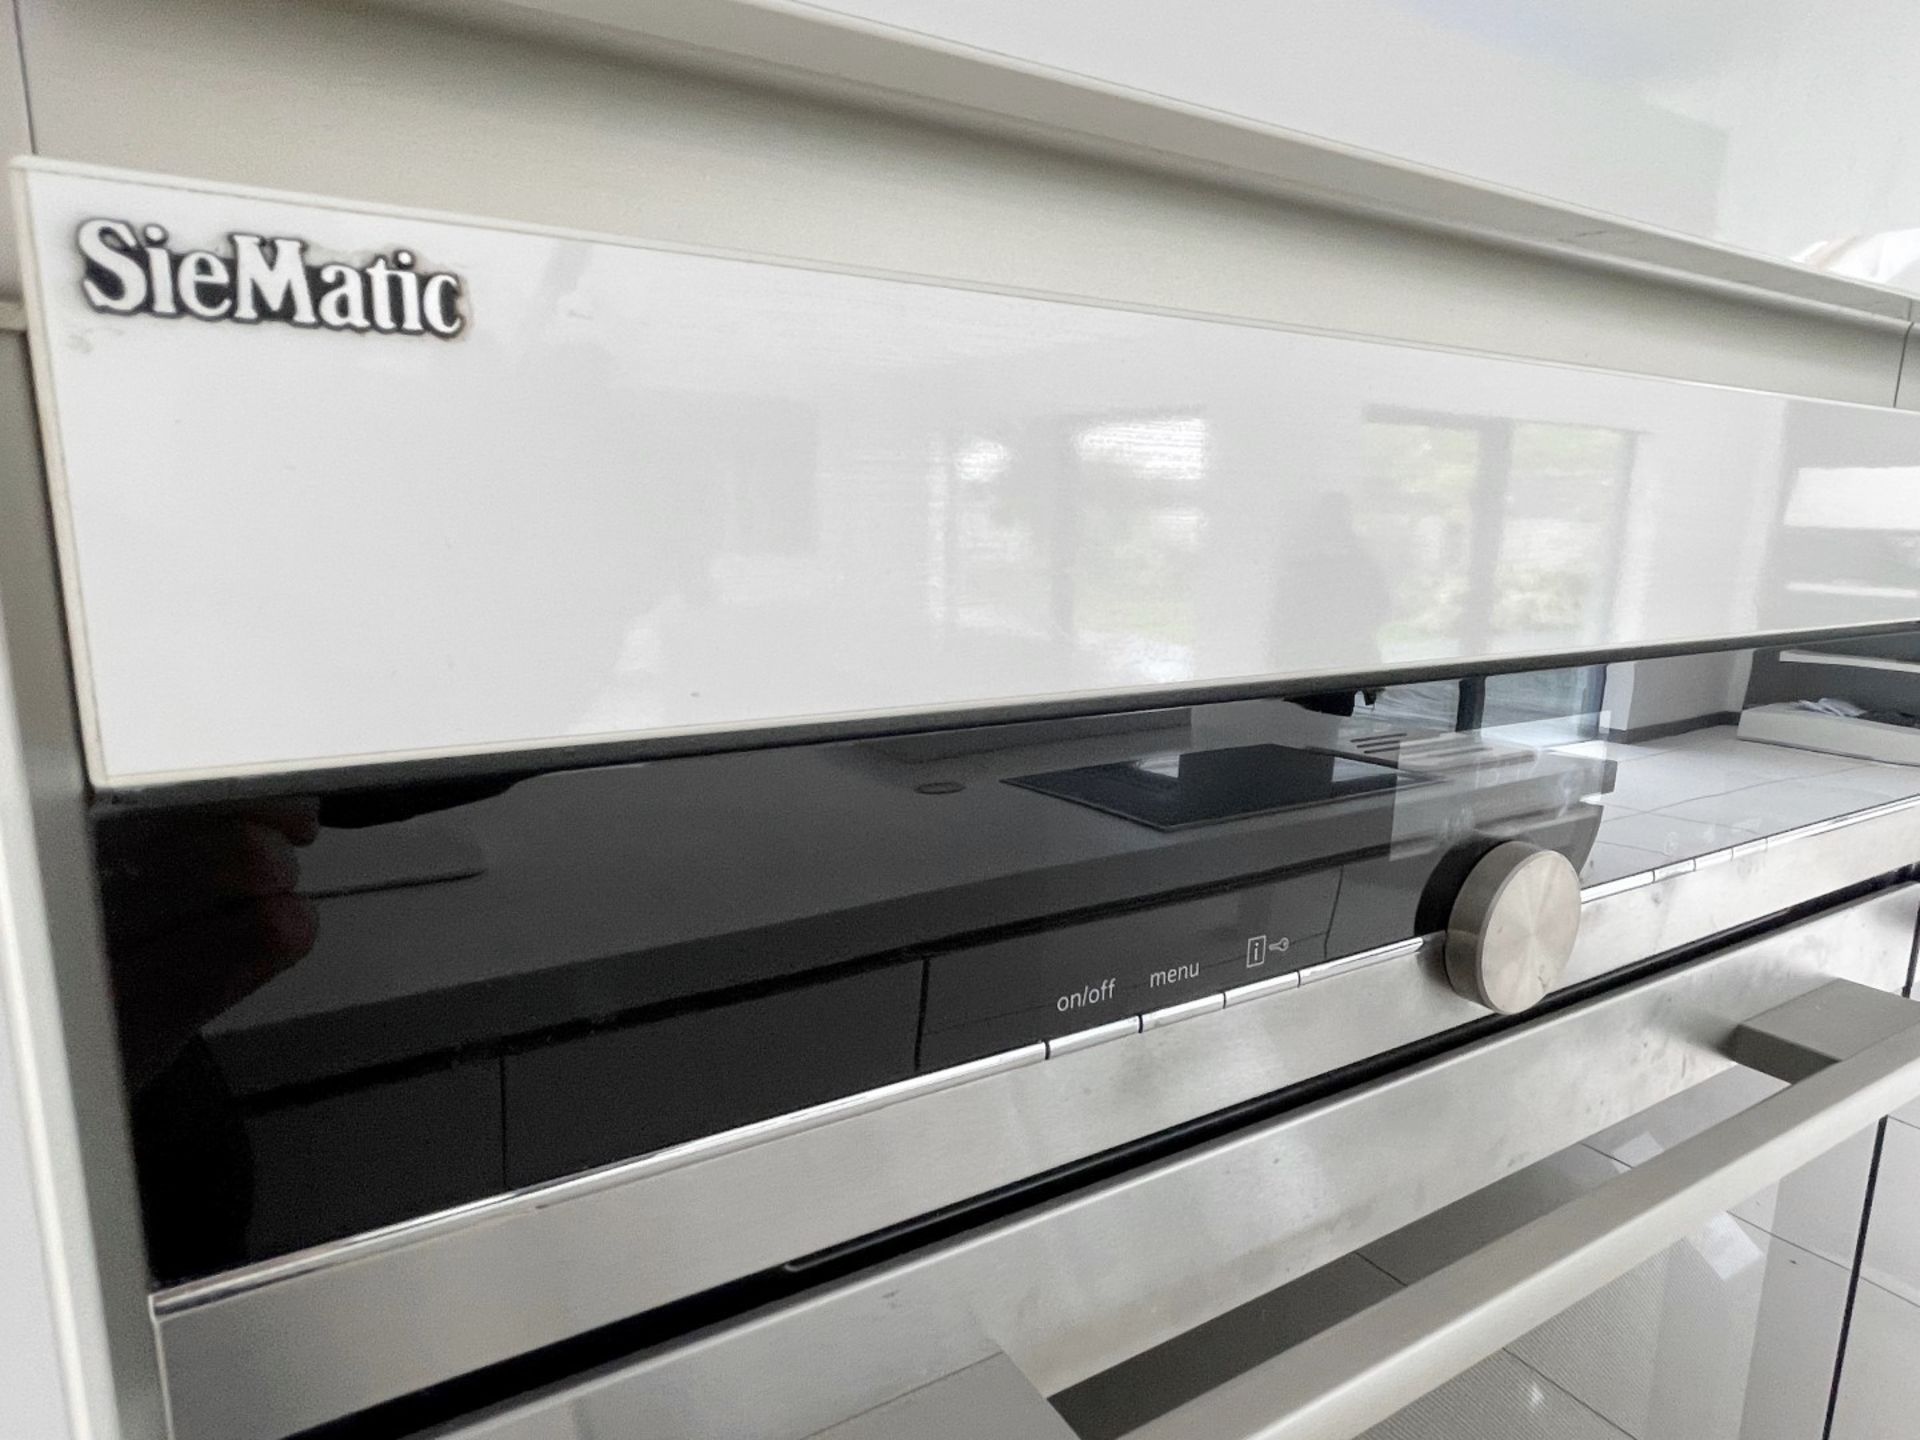 1 x SieMatic Contemporary Fitted Kitchen With Branded Appliances, Central Island + Corian Worktops - Image 61 of 100